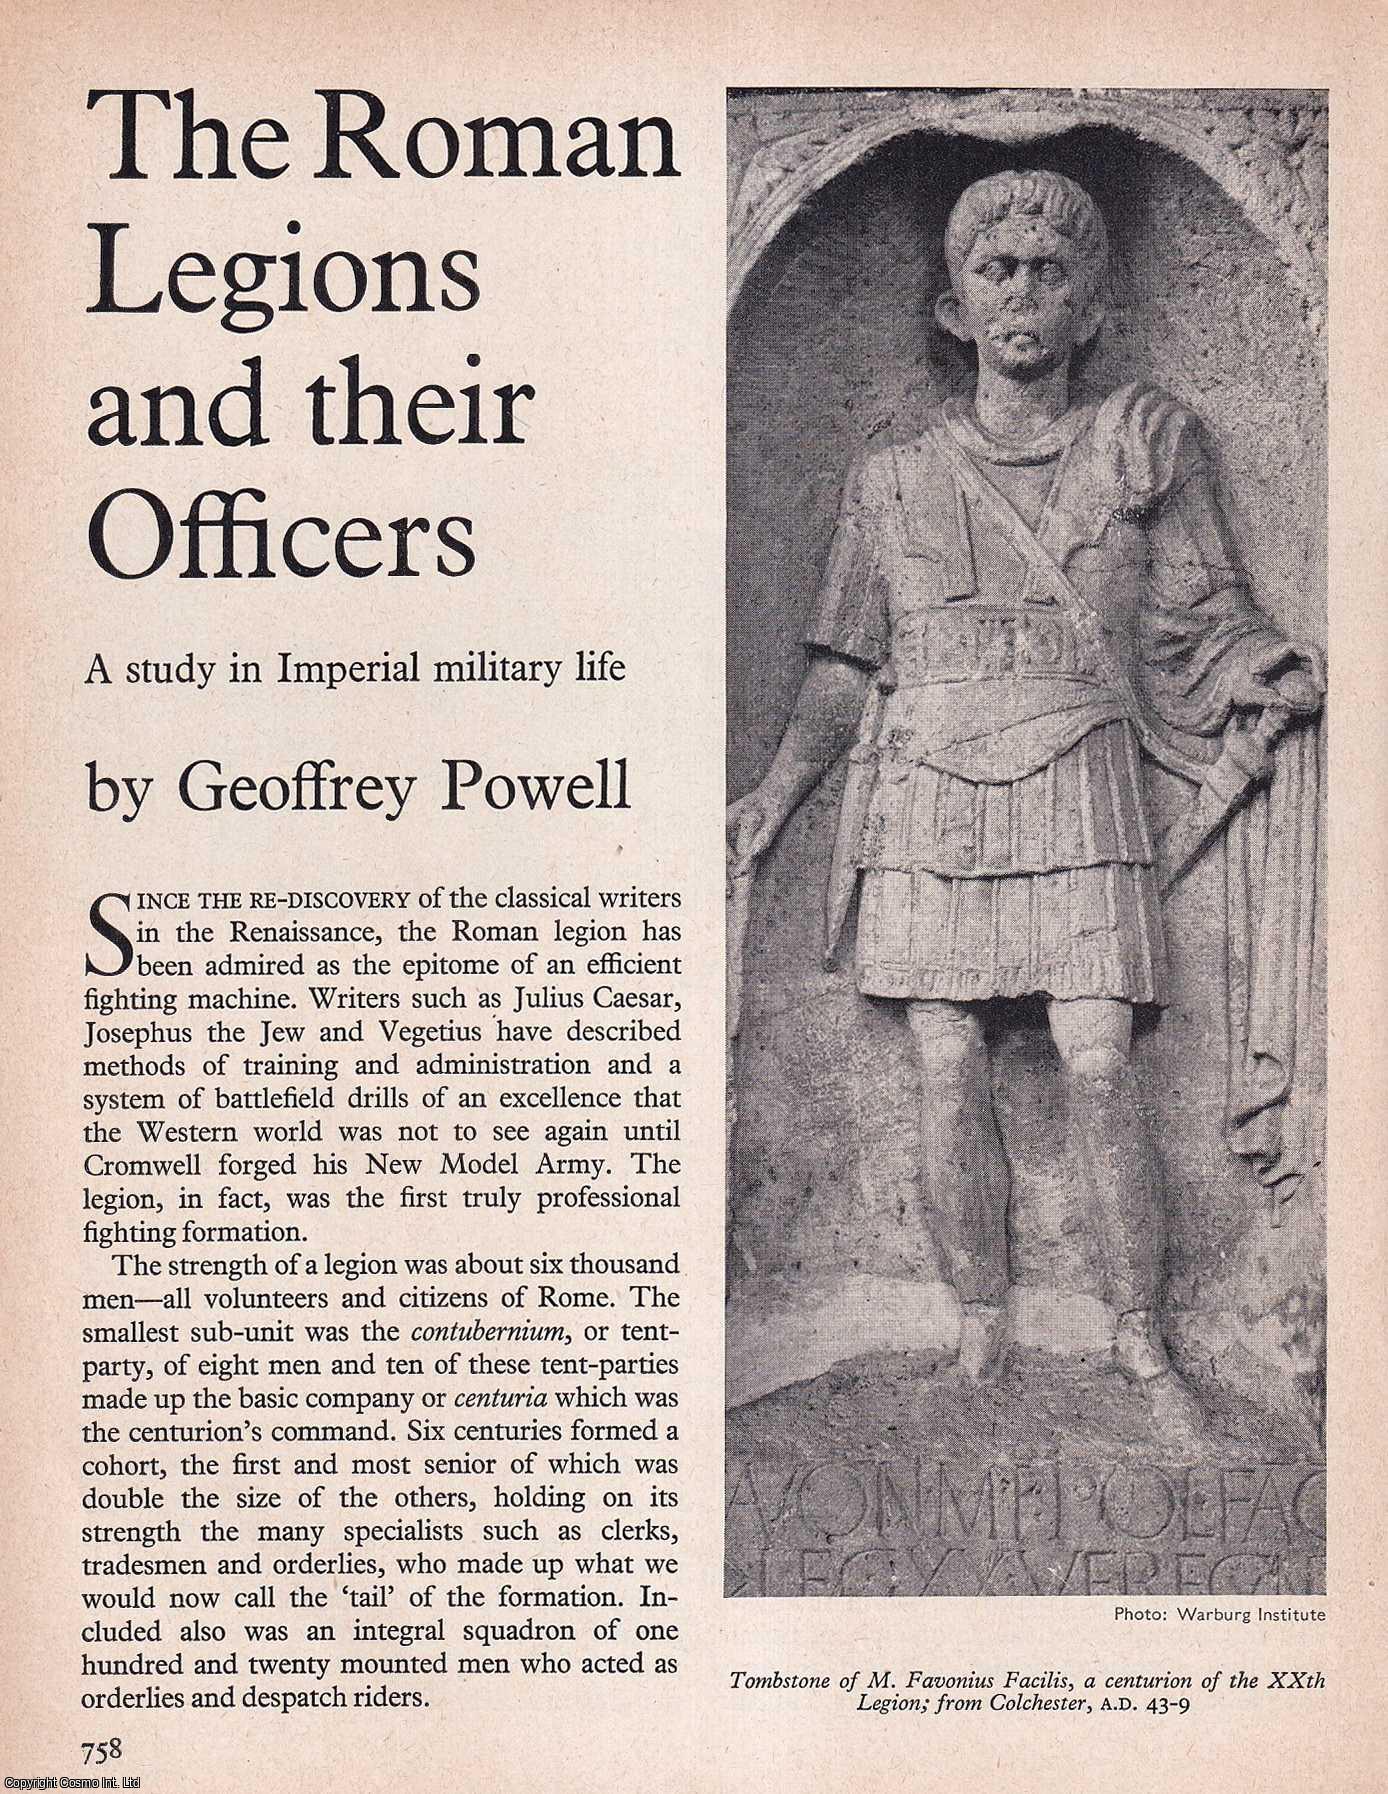 Geoffrey Powell - The Roman Legions and their Officers: A Study in Imperial Military Life. An original article from History Today magazine, 1967.